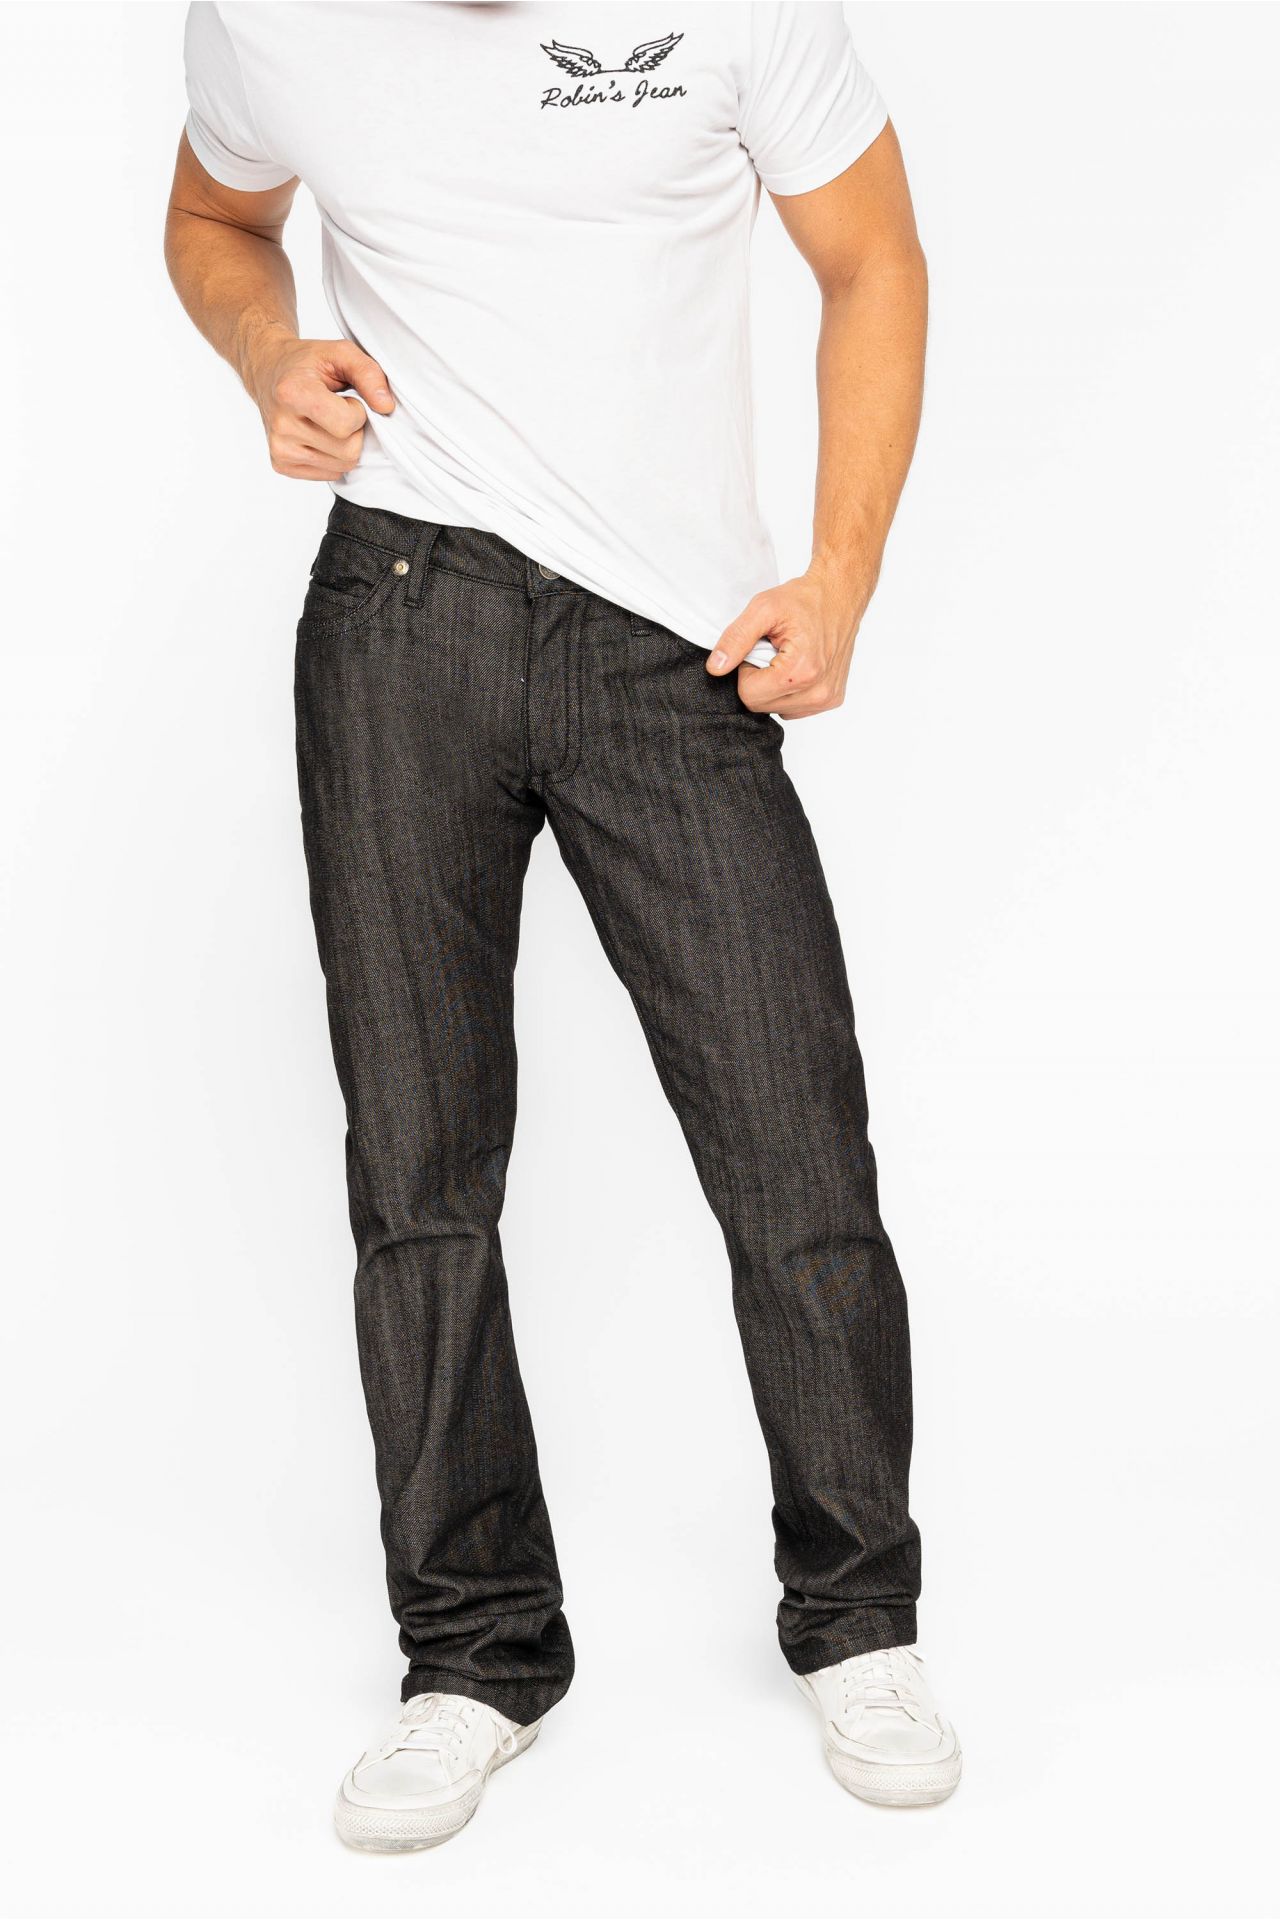 RAW DENIM COLLECTION MENS STRAIGHT LEG LONG FLAP JEANS WITH CRYSTALS